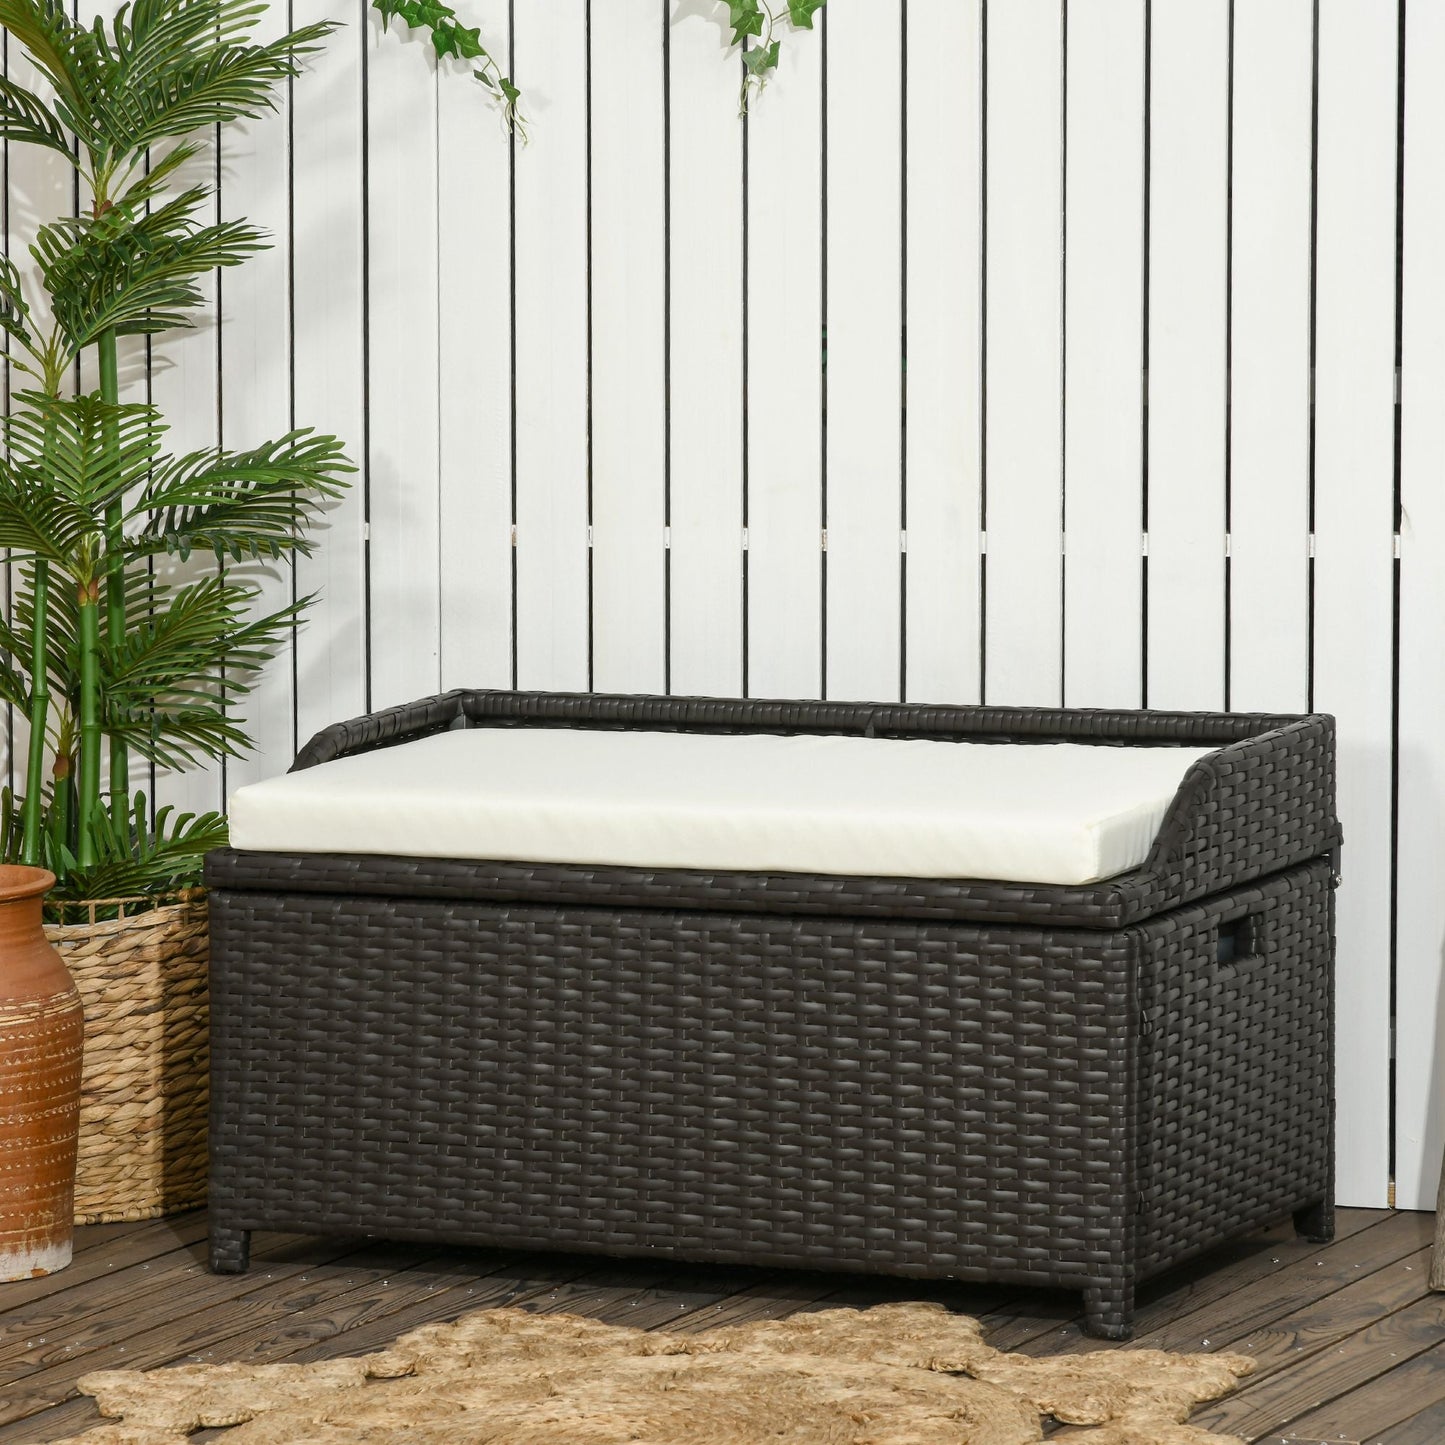 Outdoor and Garden-Patio Wicker Storage Bench, Cushioned Outdoor PE Rattan Patio Furniture, Air Strut Assisted Easy Open, 2-In-1 Seat Box with Handles Seat - Outdoor Style Company